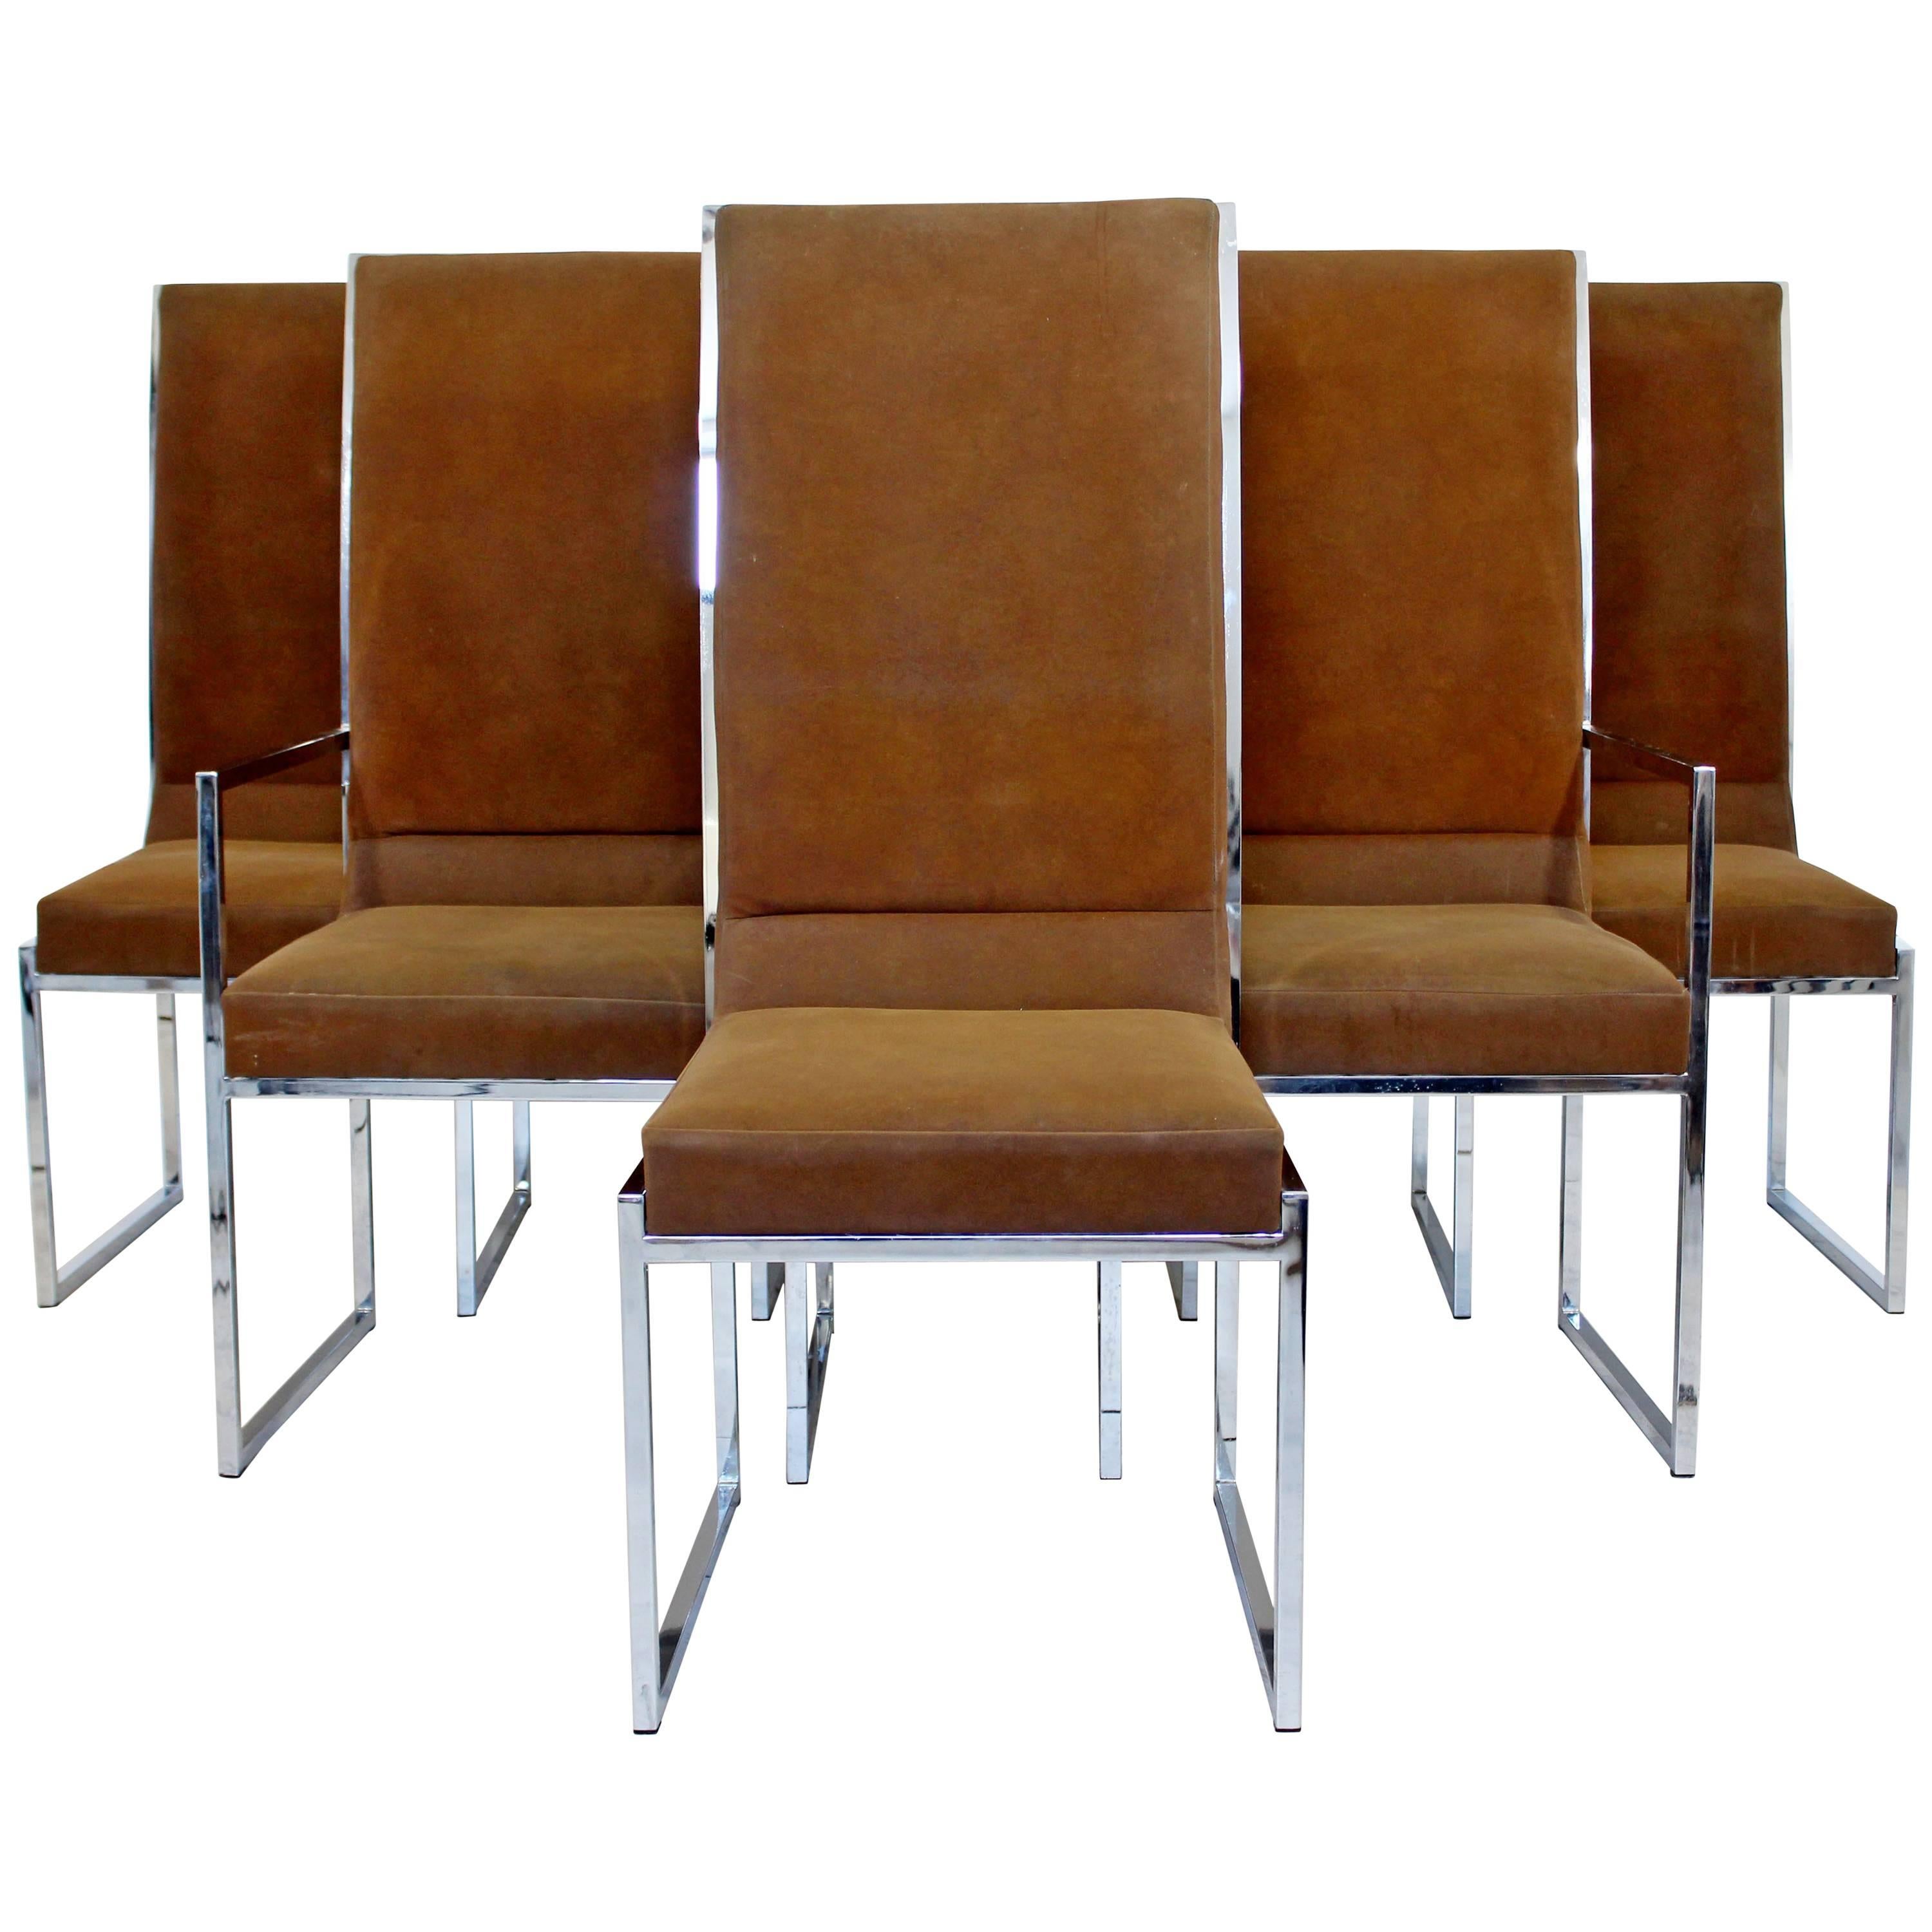 Mid-Century Modern Milo Baughman for DIA Set of Six Chrome Dining Chairs, 1970s